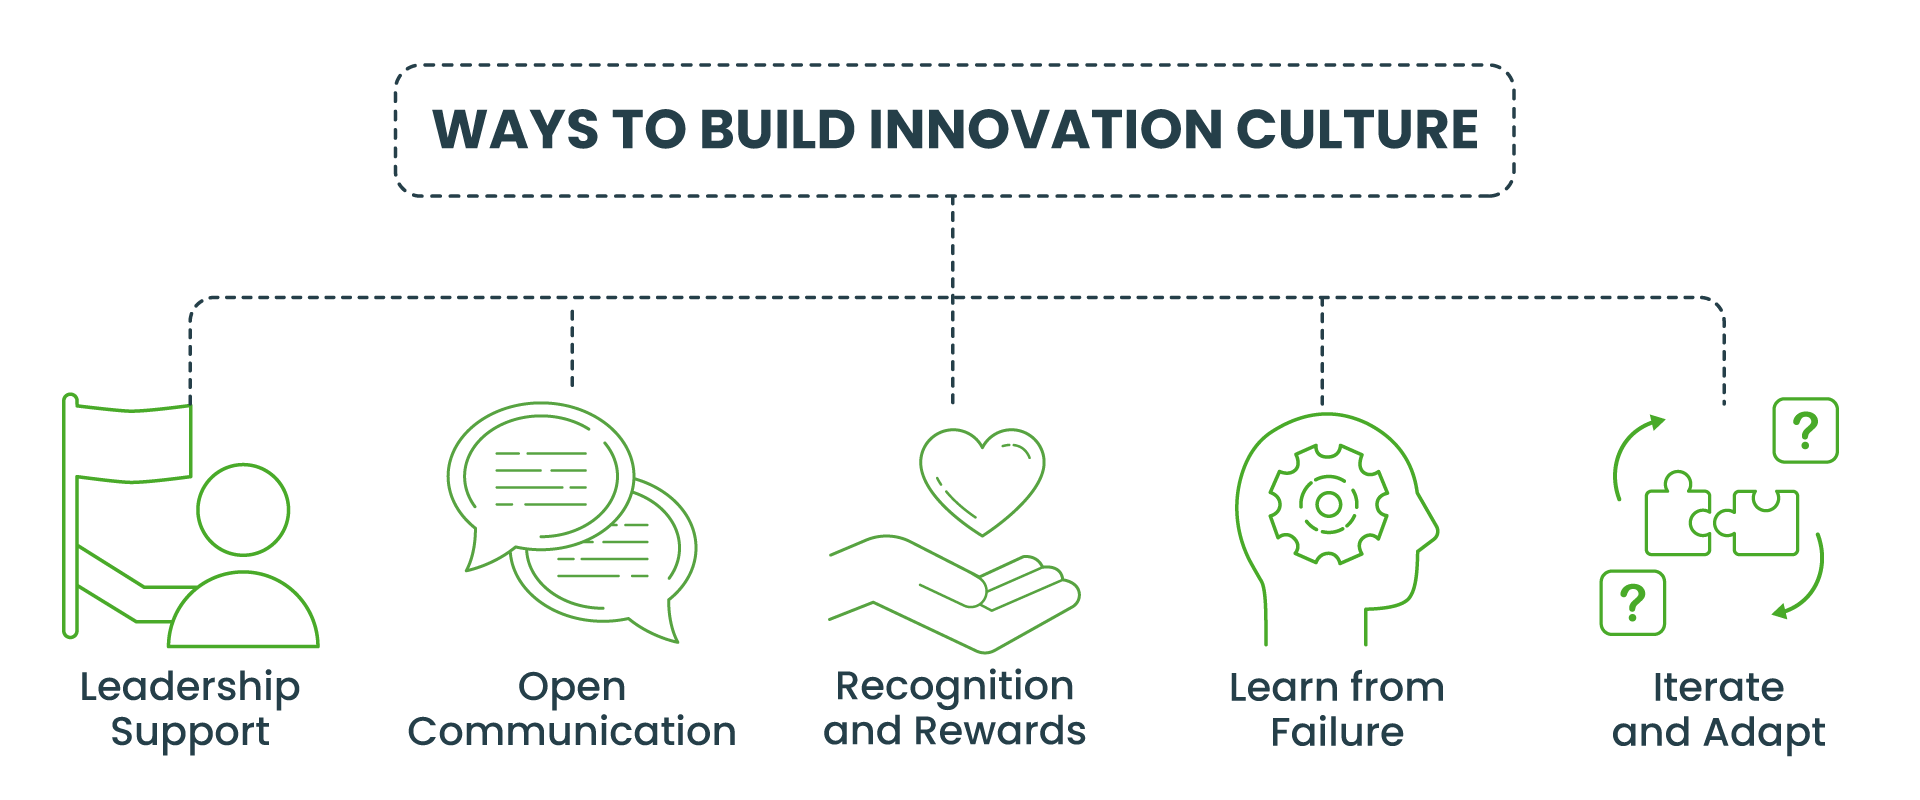 Stage-Gate Innovation Culture